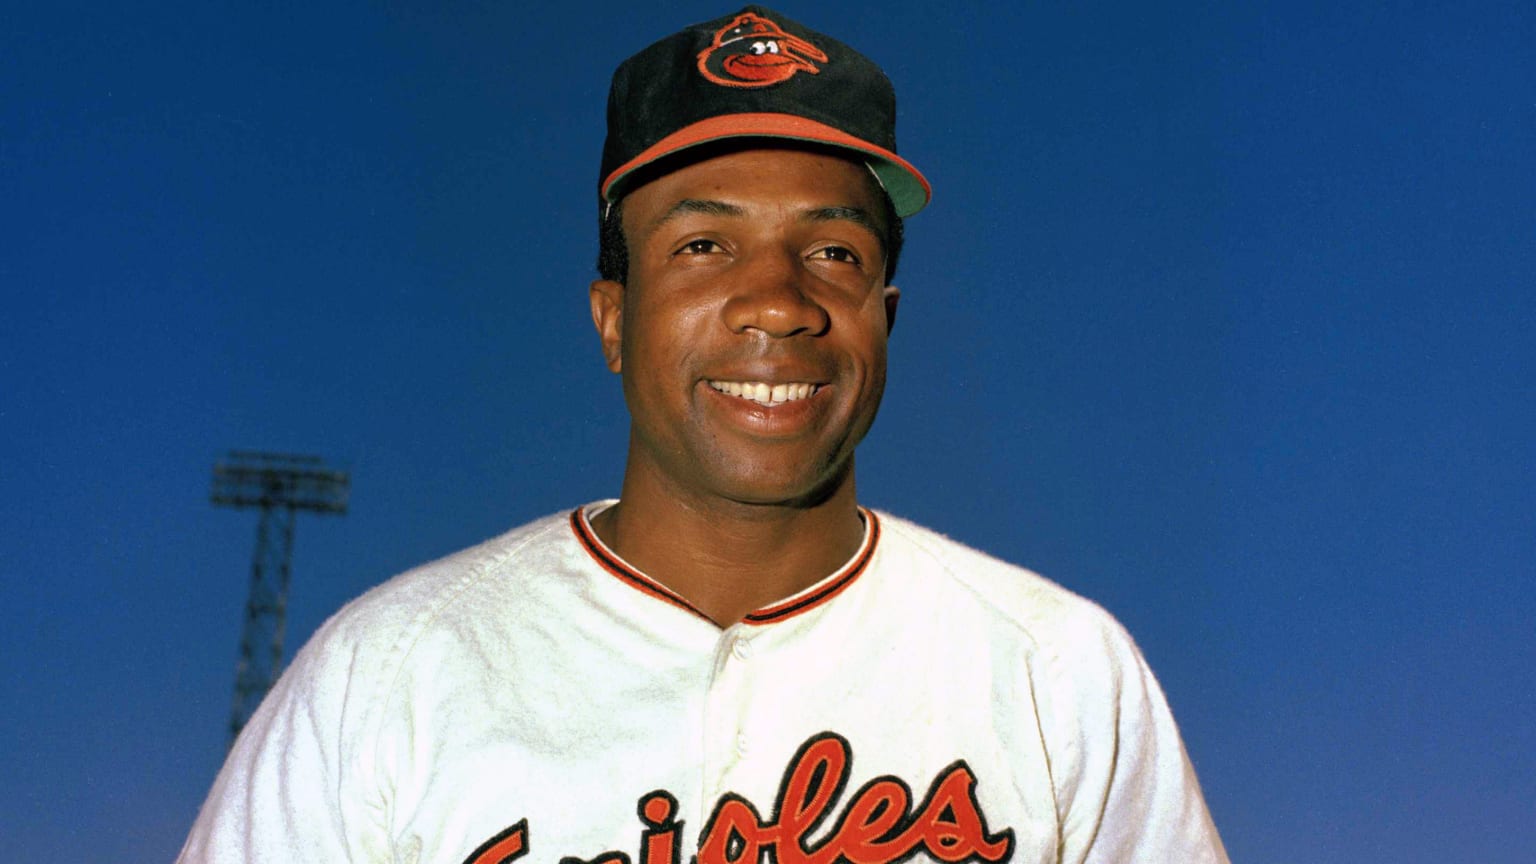 Remembering Frank Robinson - Athletes in Action